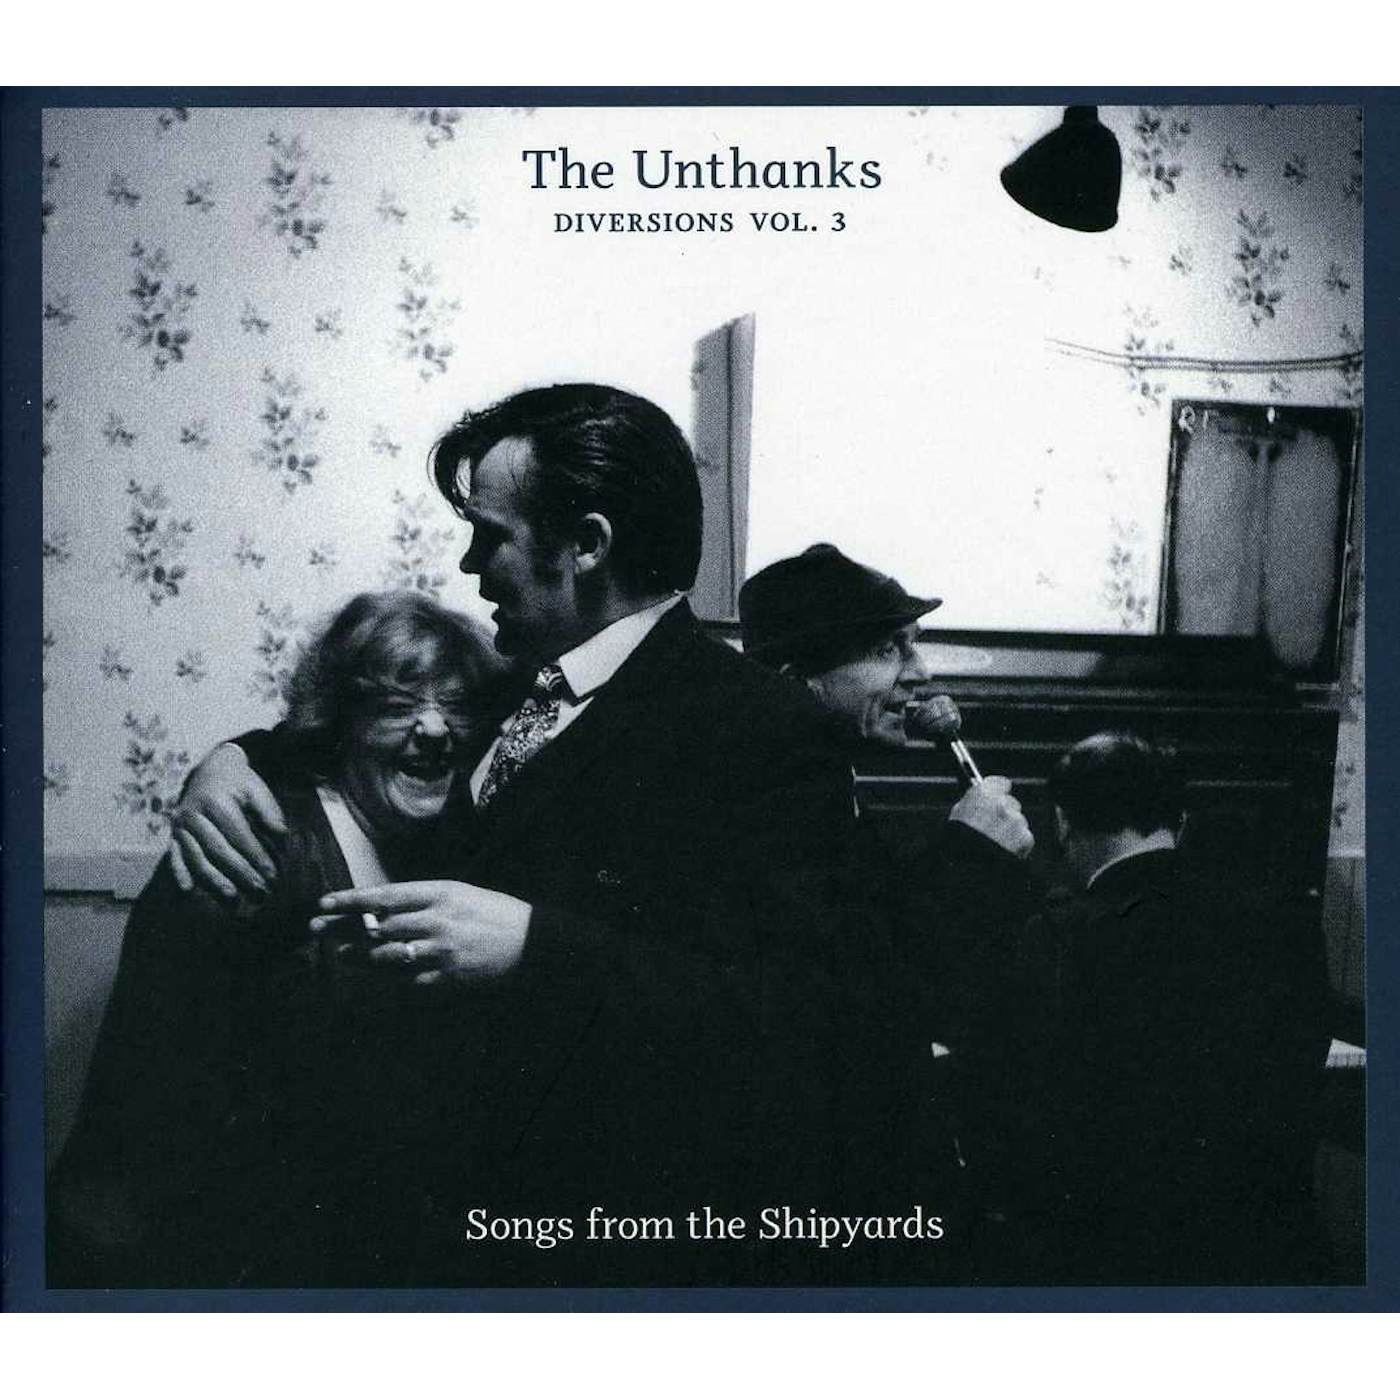 The Unthanks DIVERSIONS 3: SONGS FROM THE SHIPYARDS CD